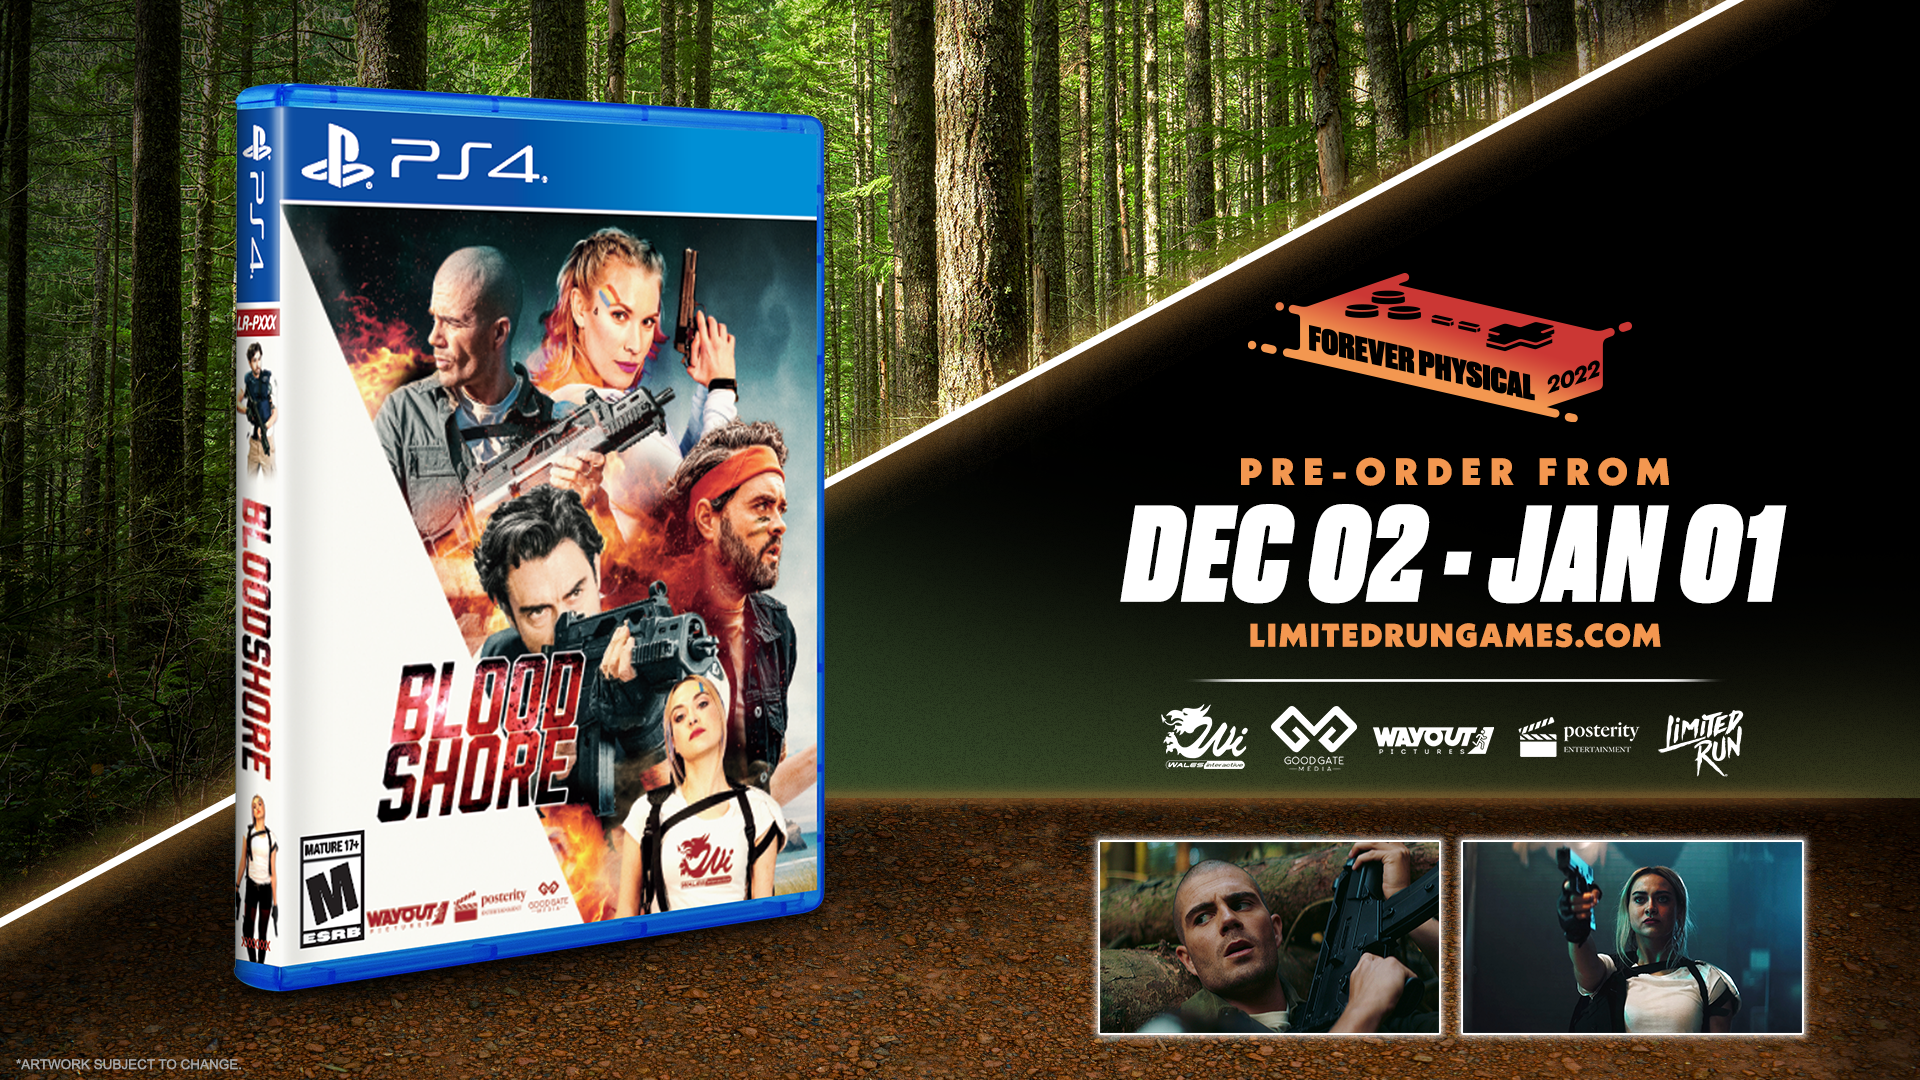 Limited Run #490: Bloodshore (PS4) – Limited Run Games